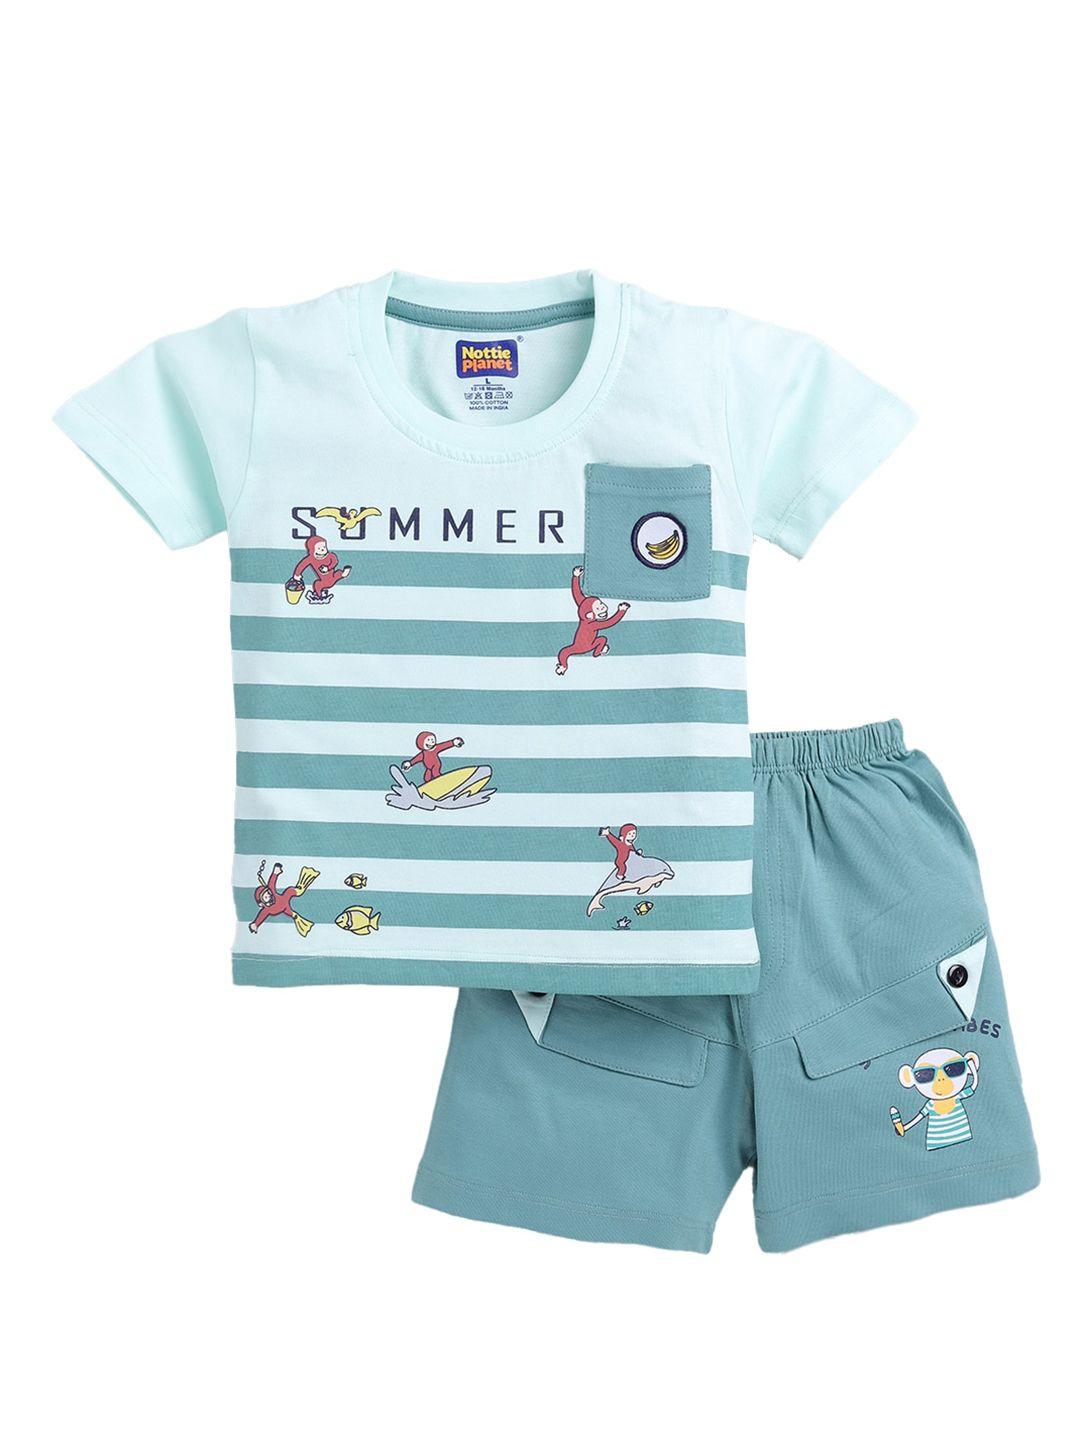 Nottie Planet Boys Cotton Printed T-shirt with Shorts Set